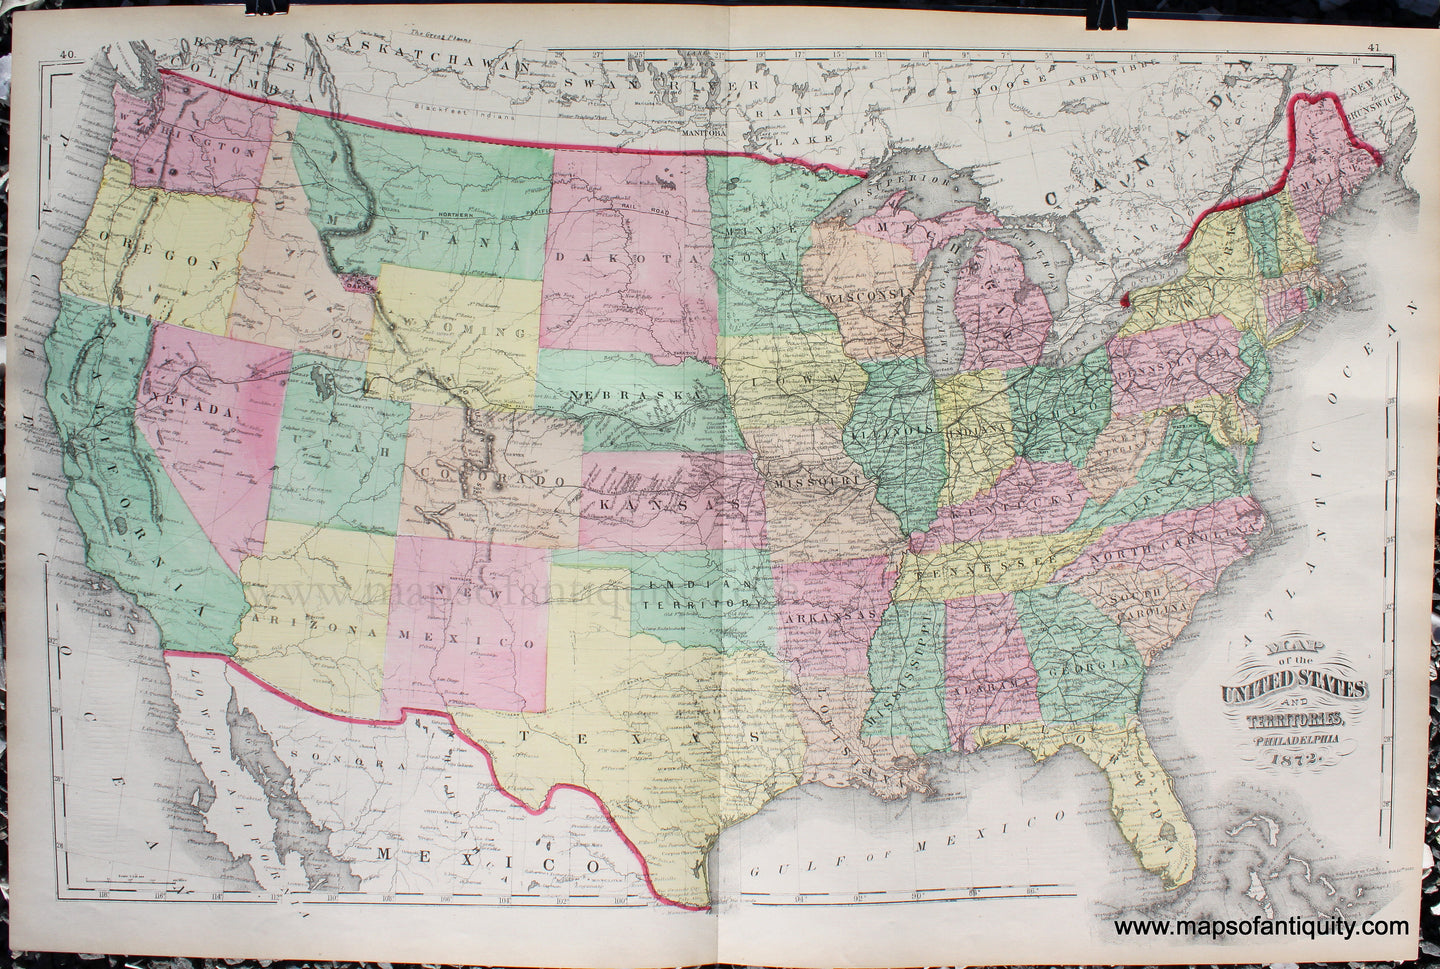 Antique-Hand-Colored-Geological-Map-Map-of-the-United-States-and-Territories-North-America-United-States-1872-Walling-and-Gray-Maps-Of-Antiquity